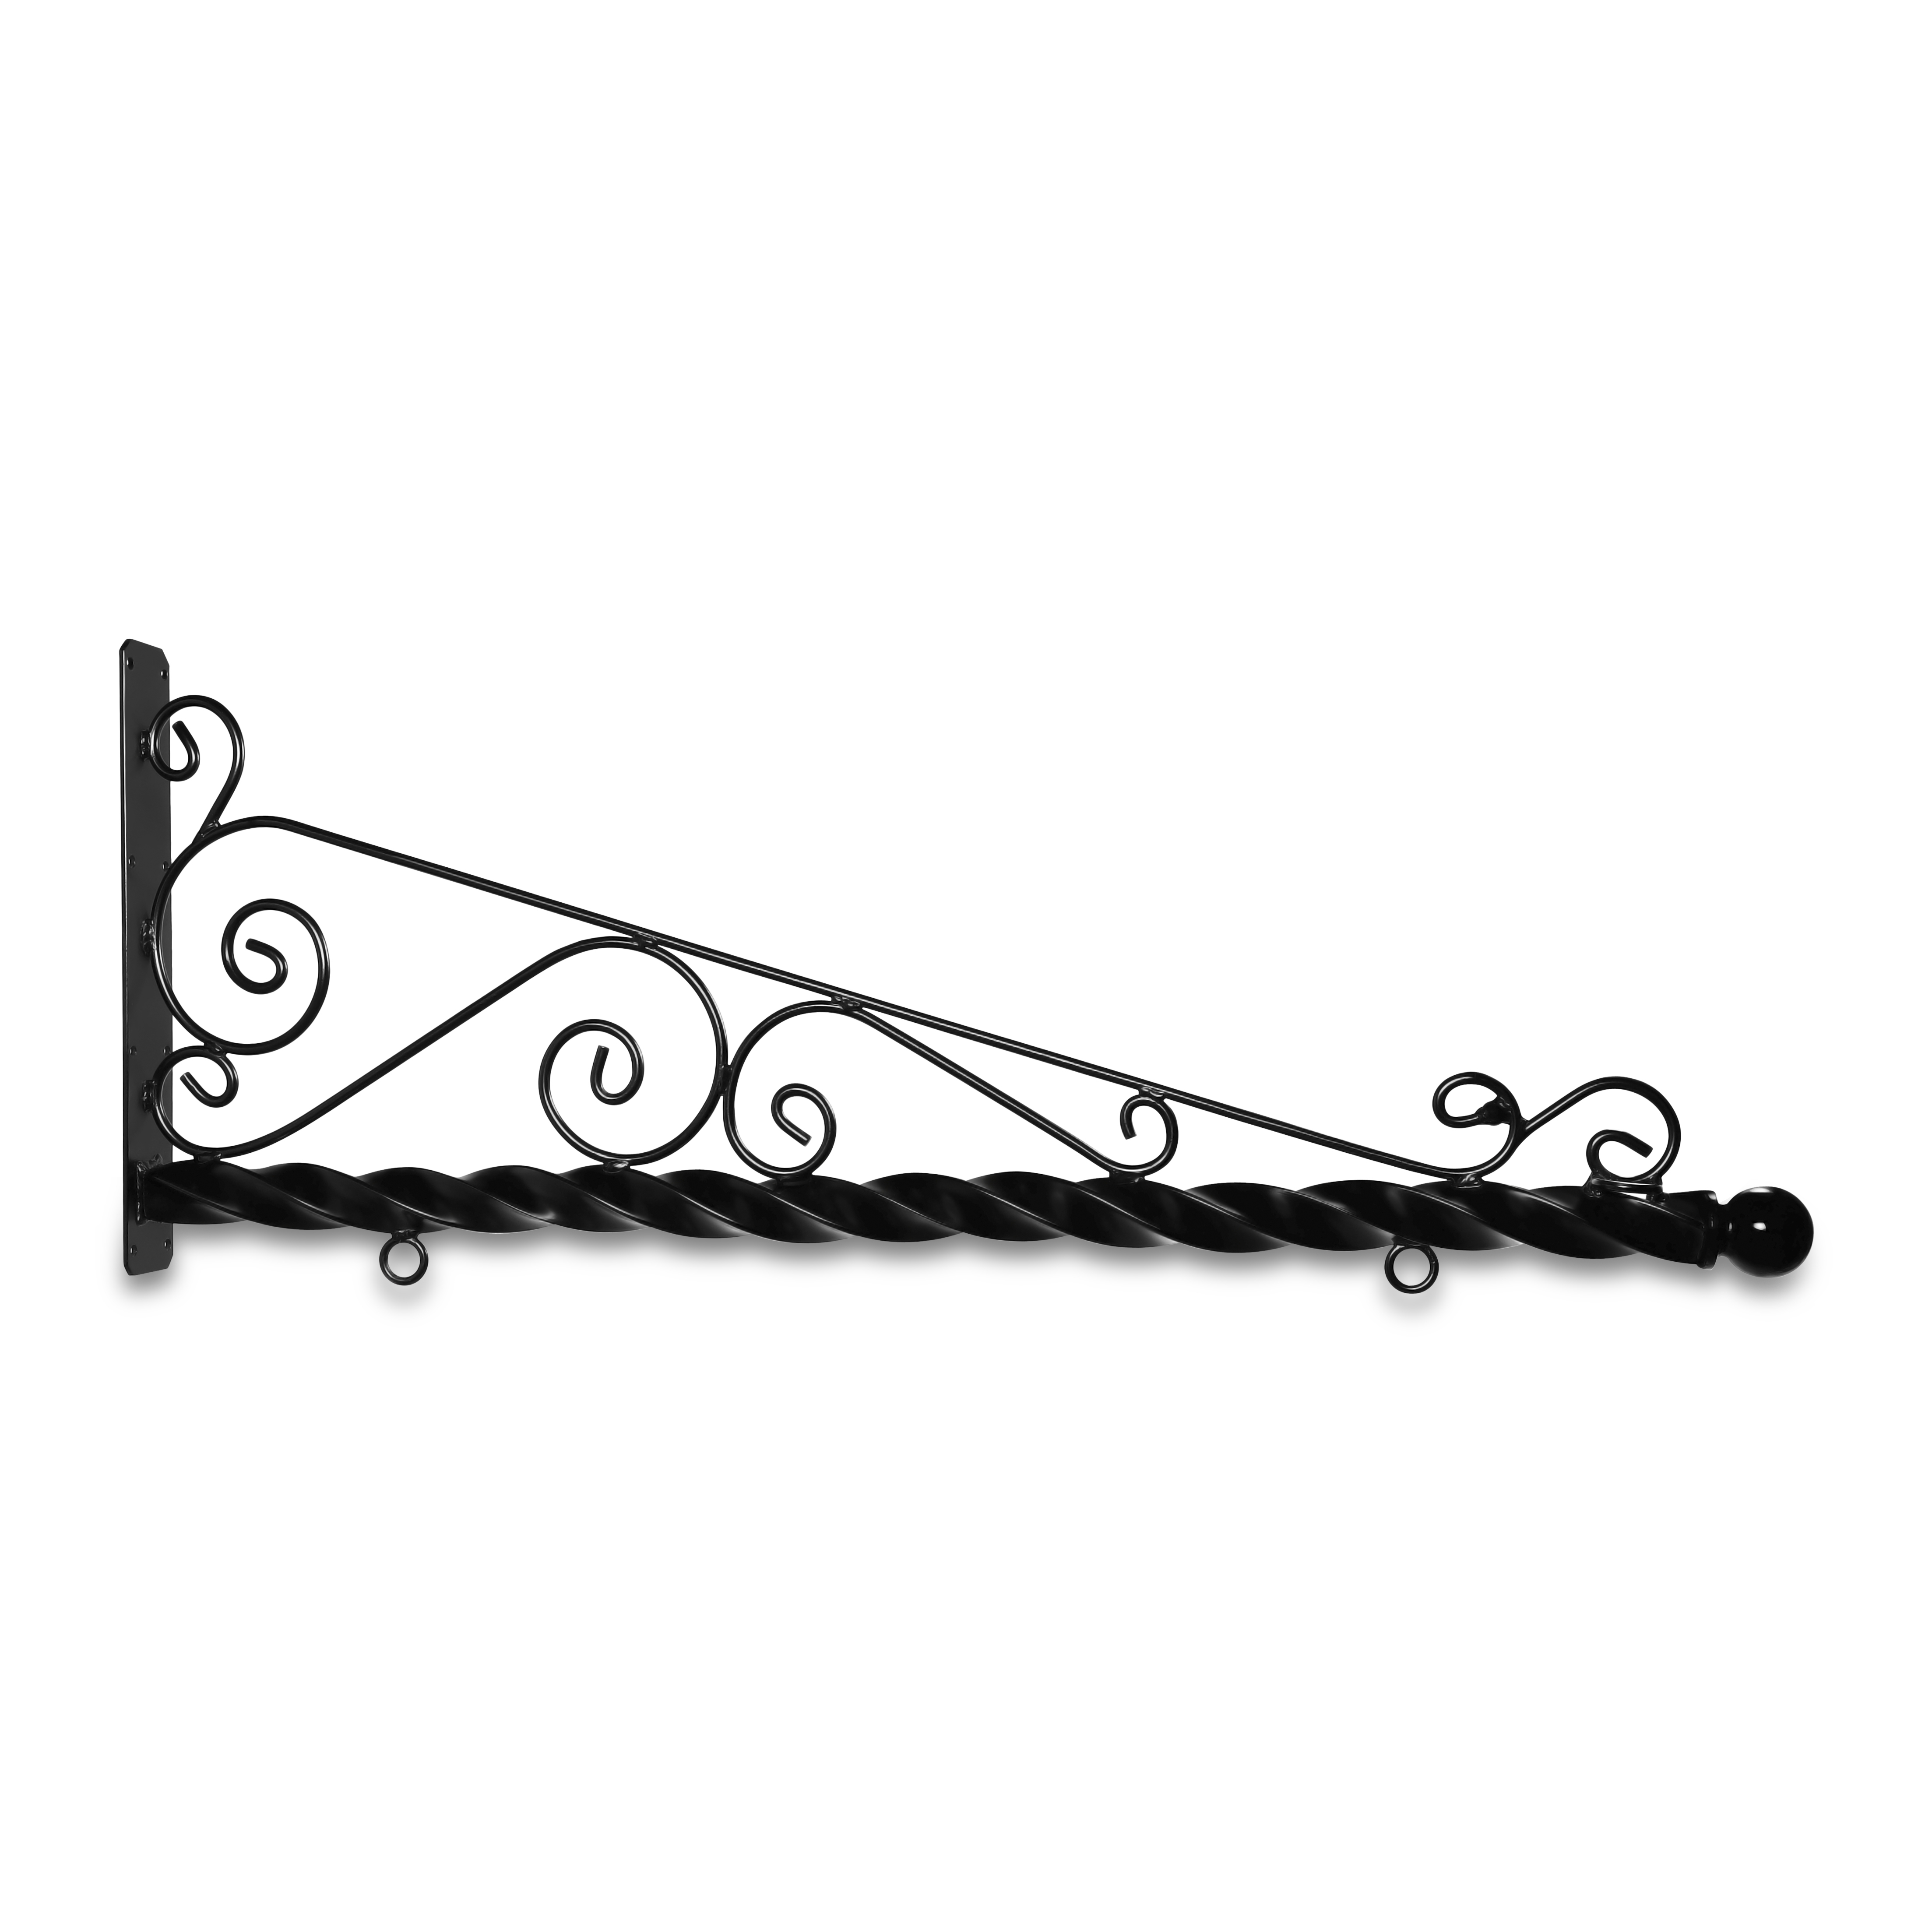 60'' Black Horizontal Super Deluxe Quin Spiral Steel Bracket with Ball Finial